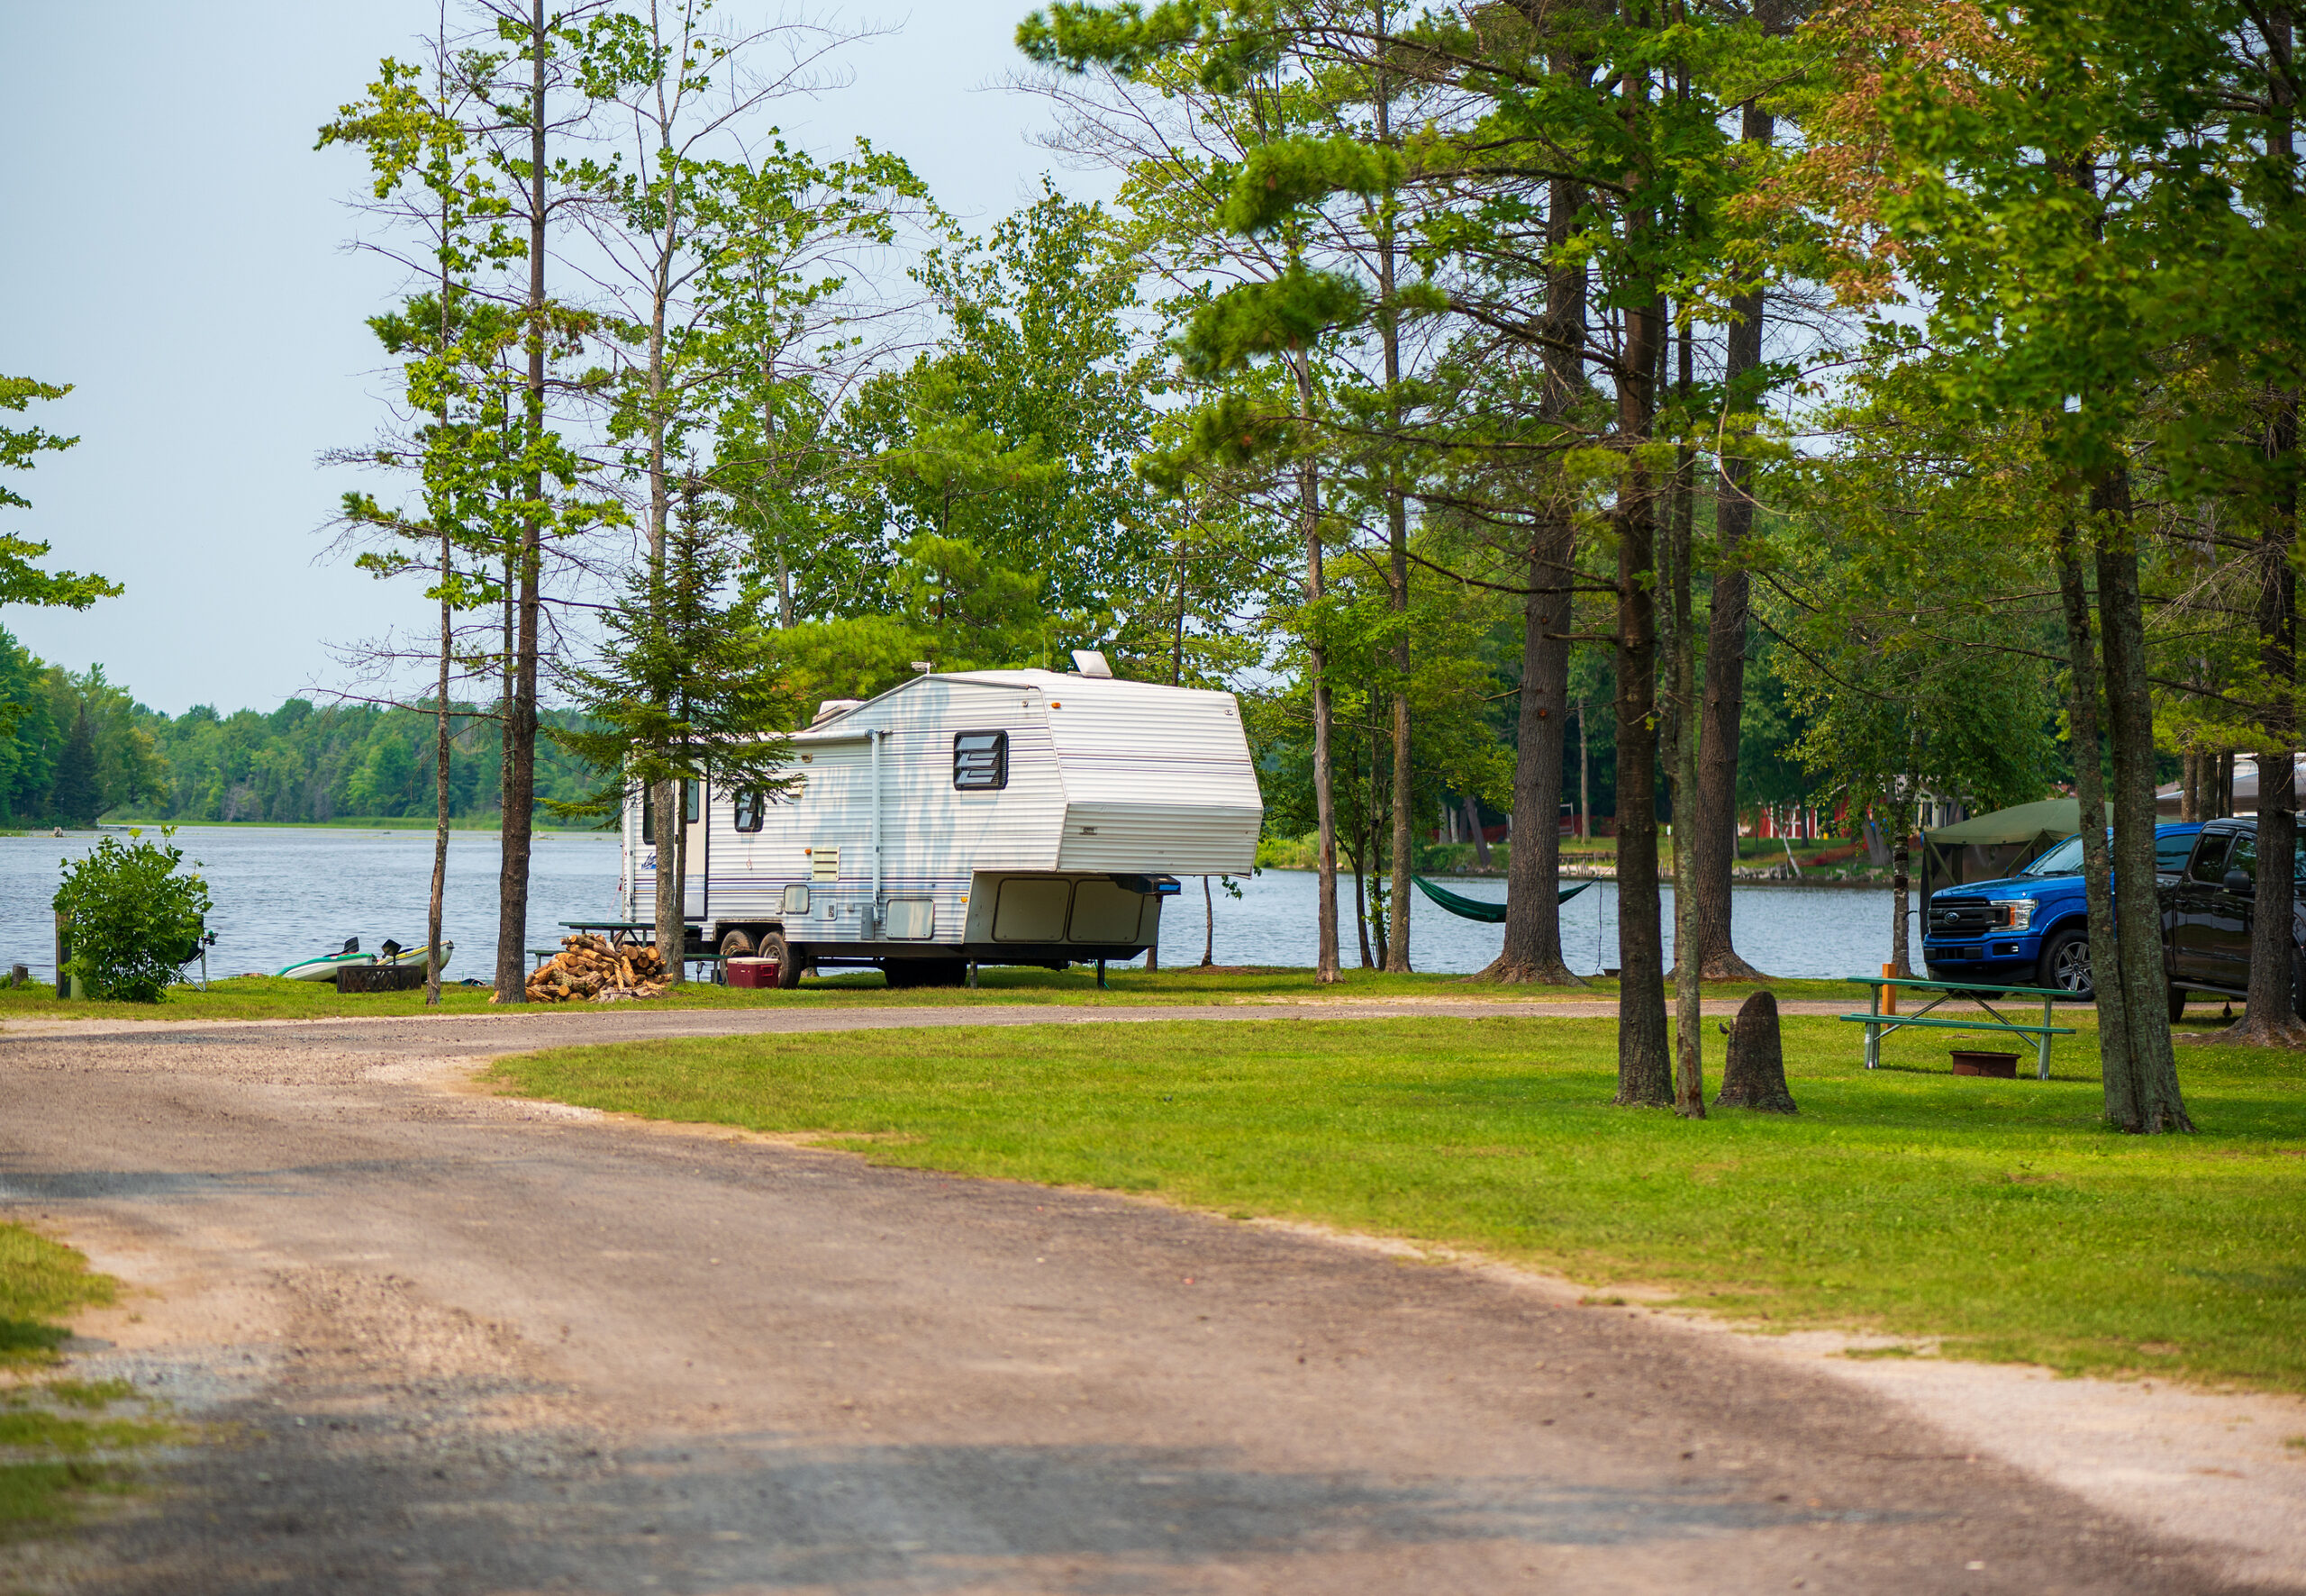 RV park land requirements